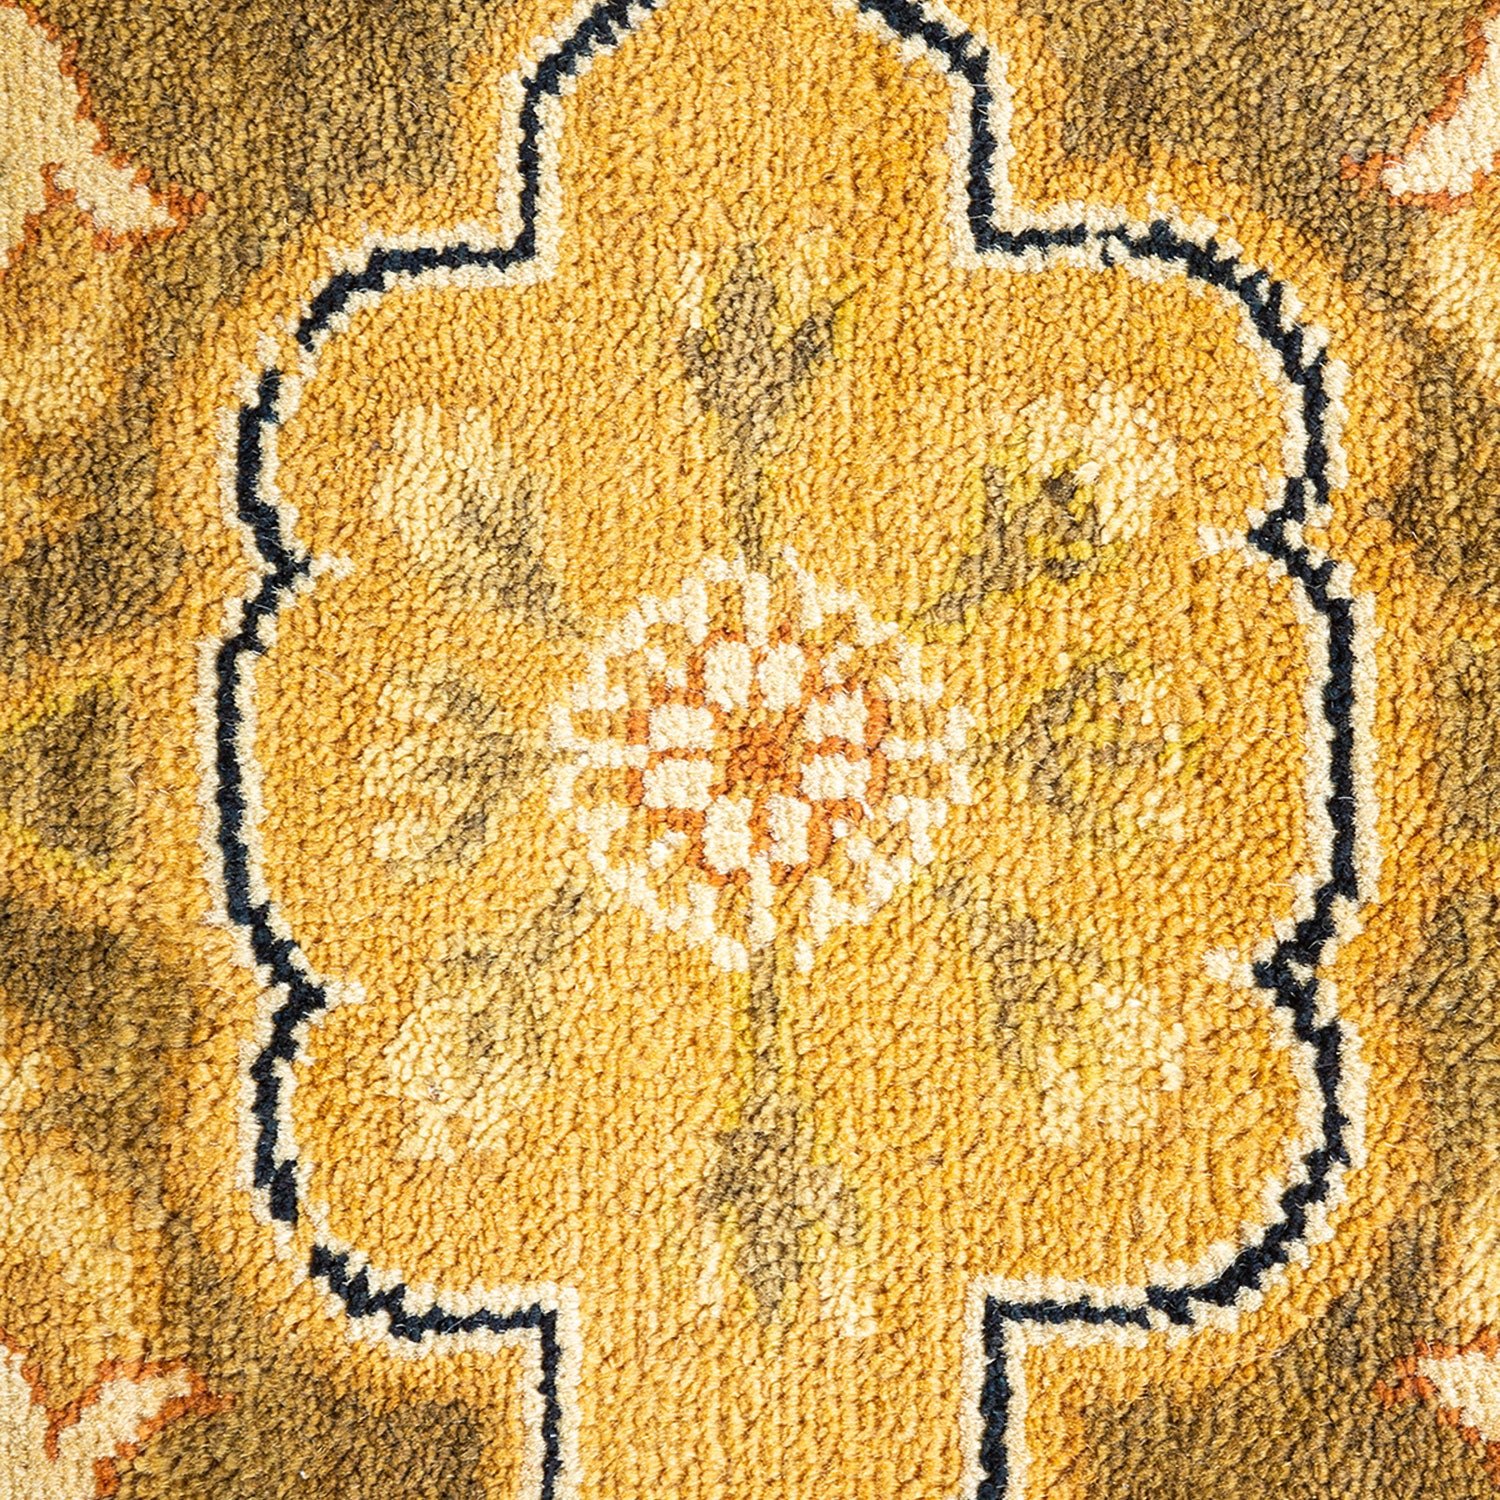 Detailed close-up of a yellow floral patterned fabric or carpet.